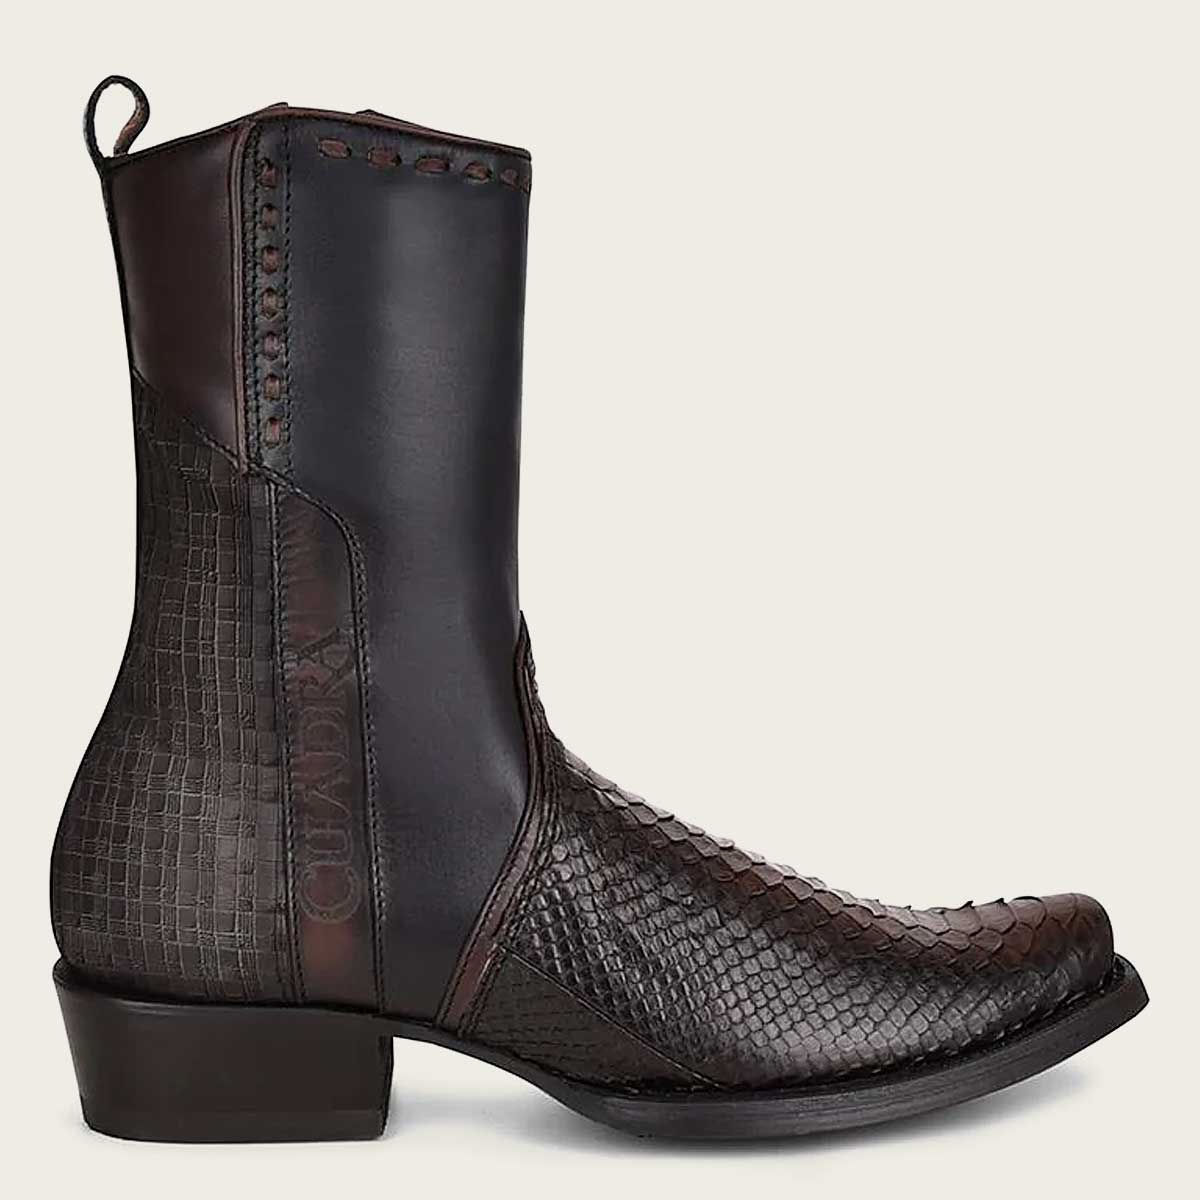 Handcrafted black boot made from exotic leather, perfect for adding a touch of sophistication to your wardrobe